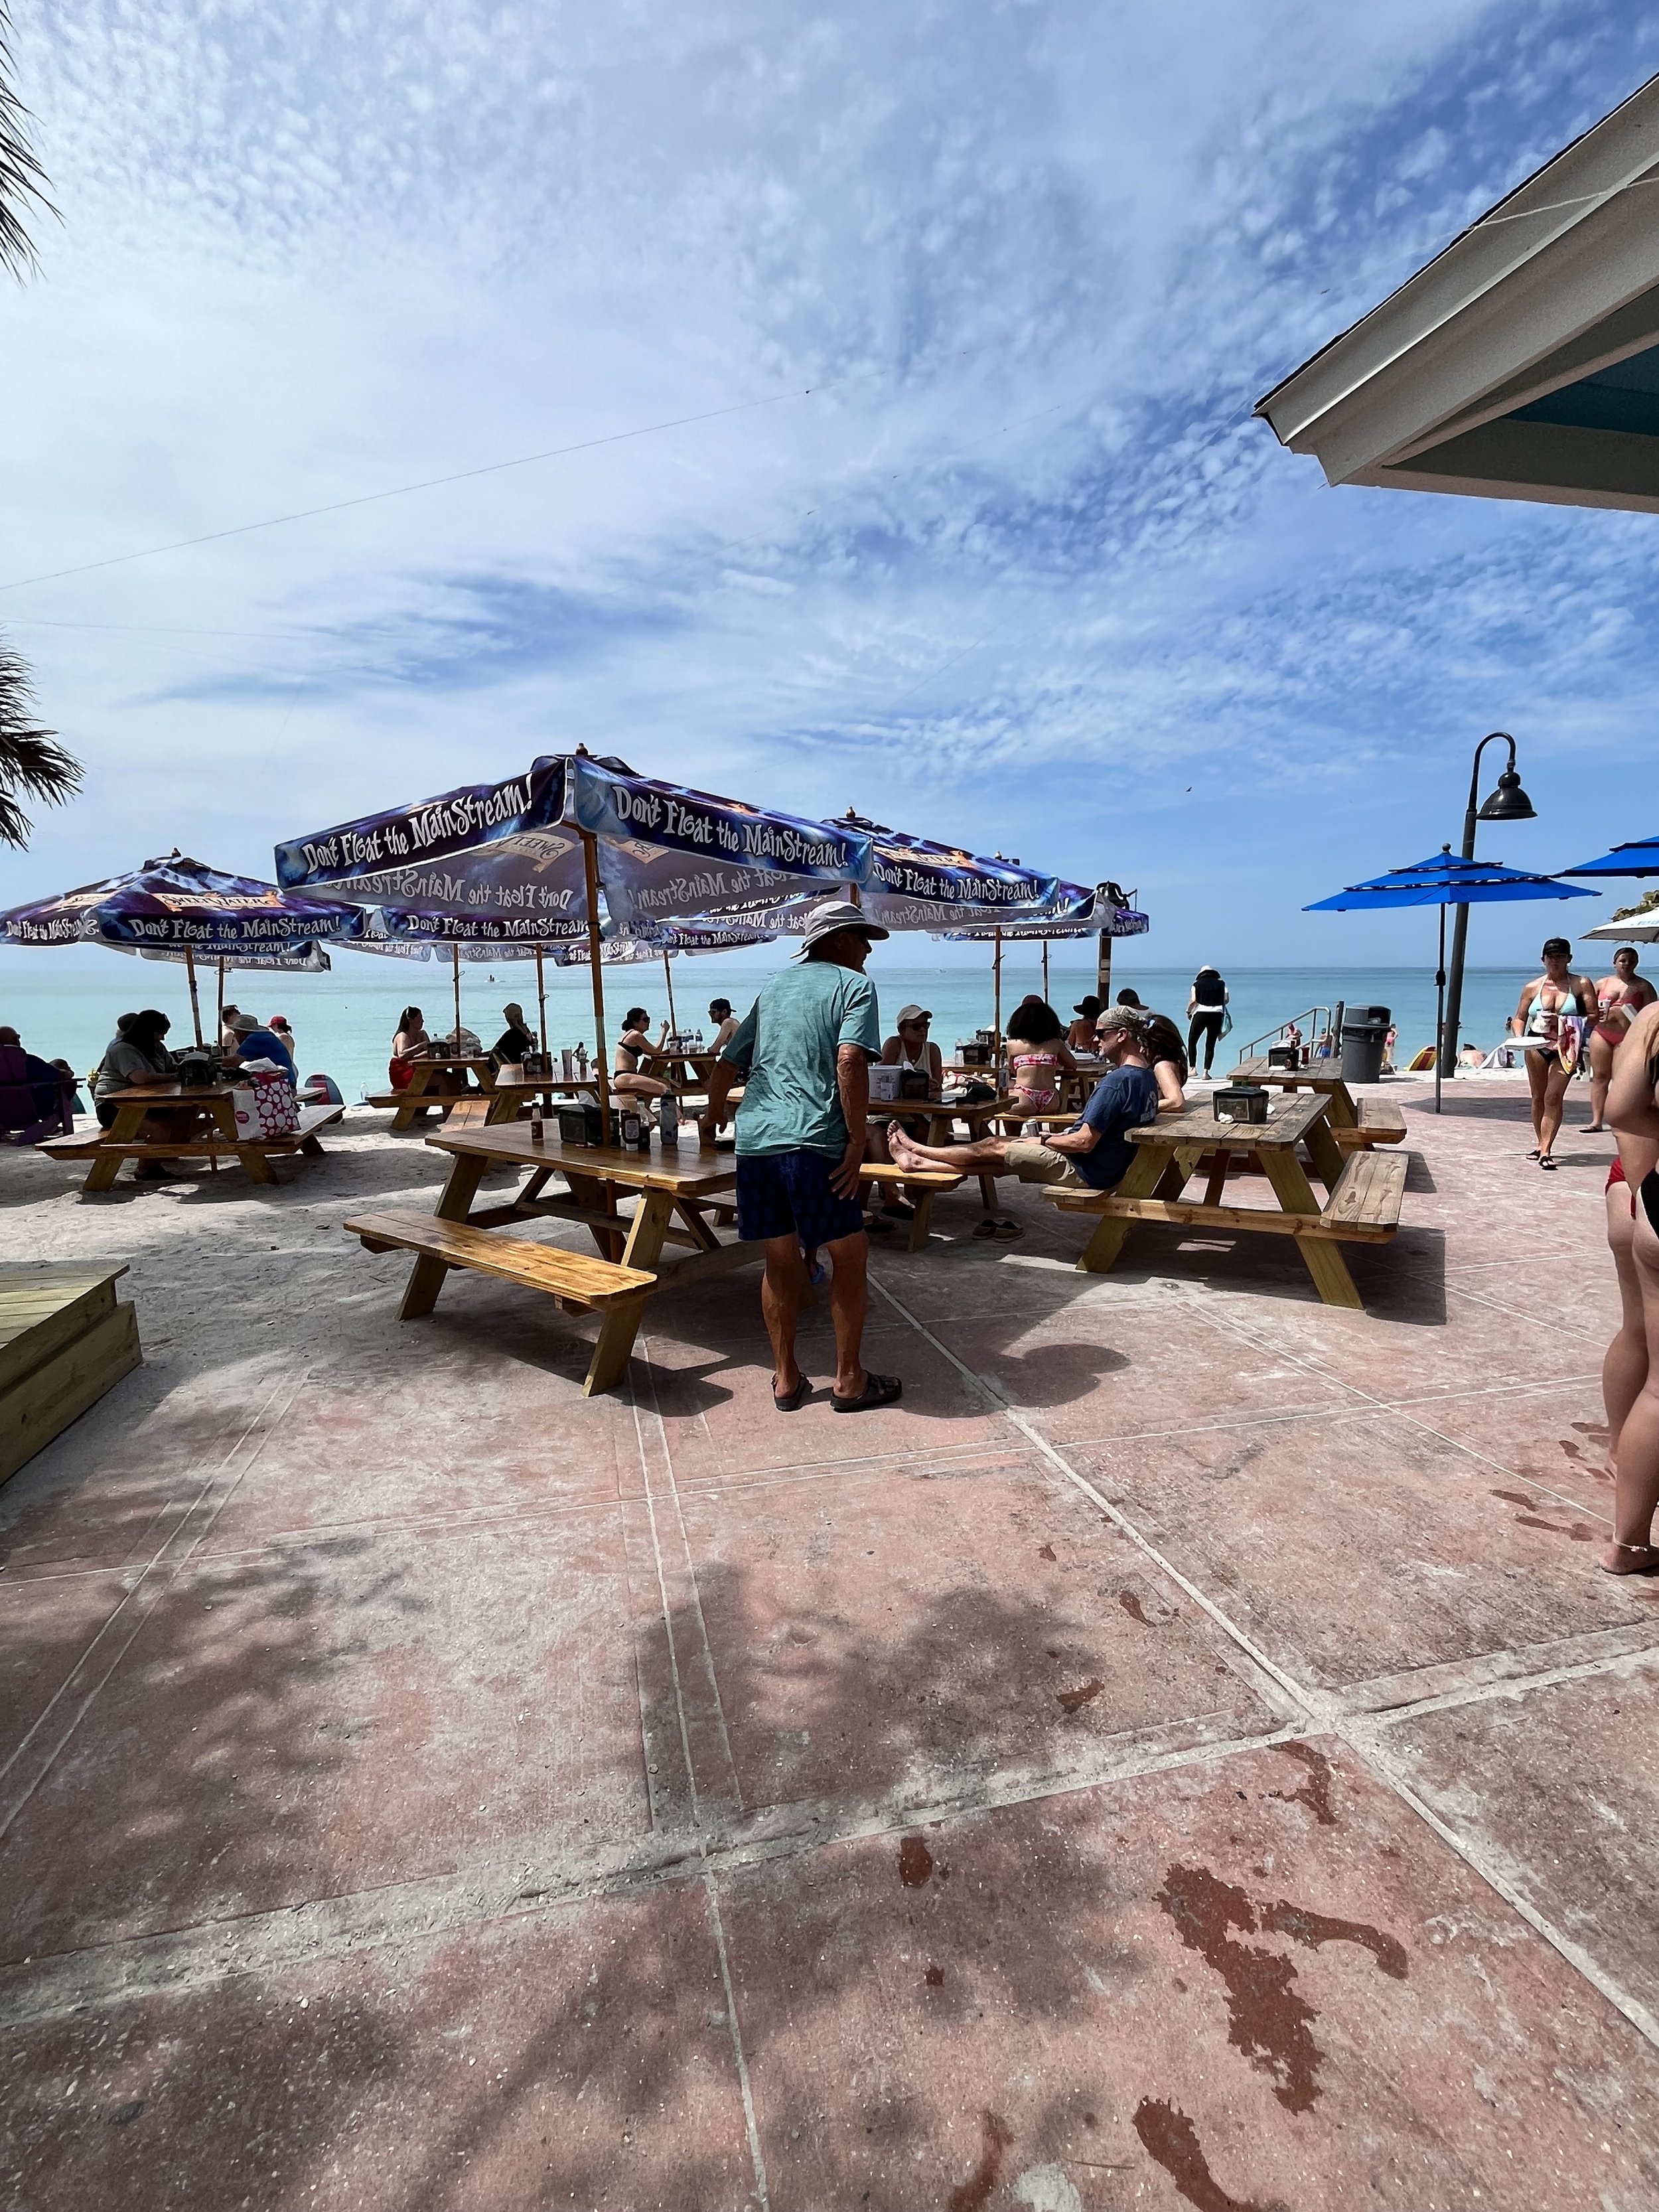 Pass-a-grille concessions picnic tables Florida.jpg